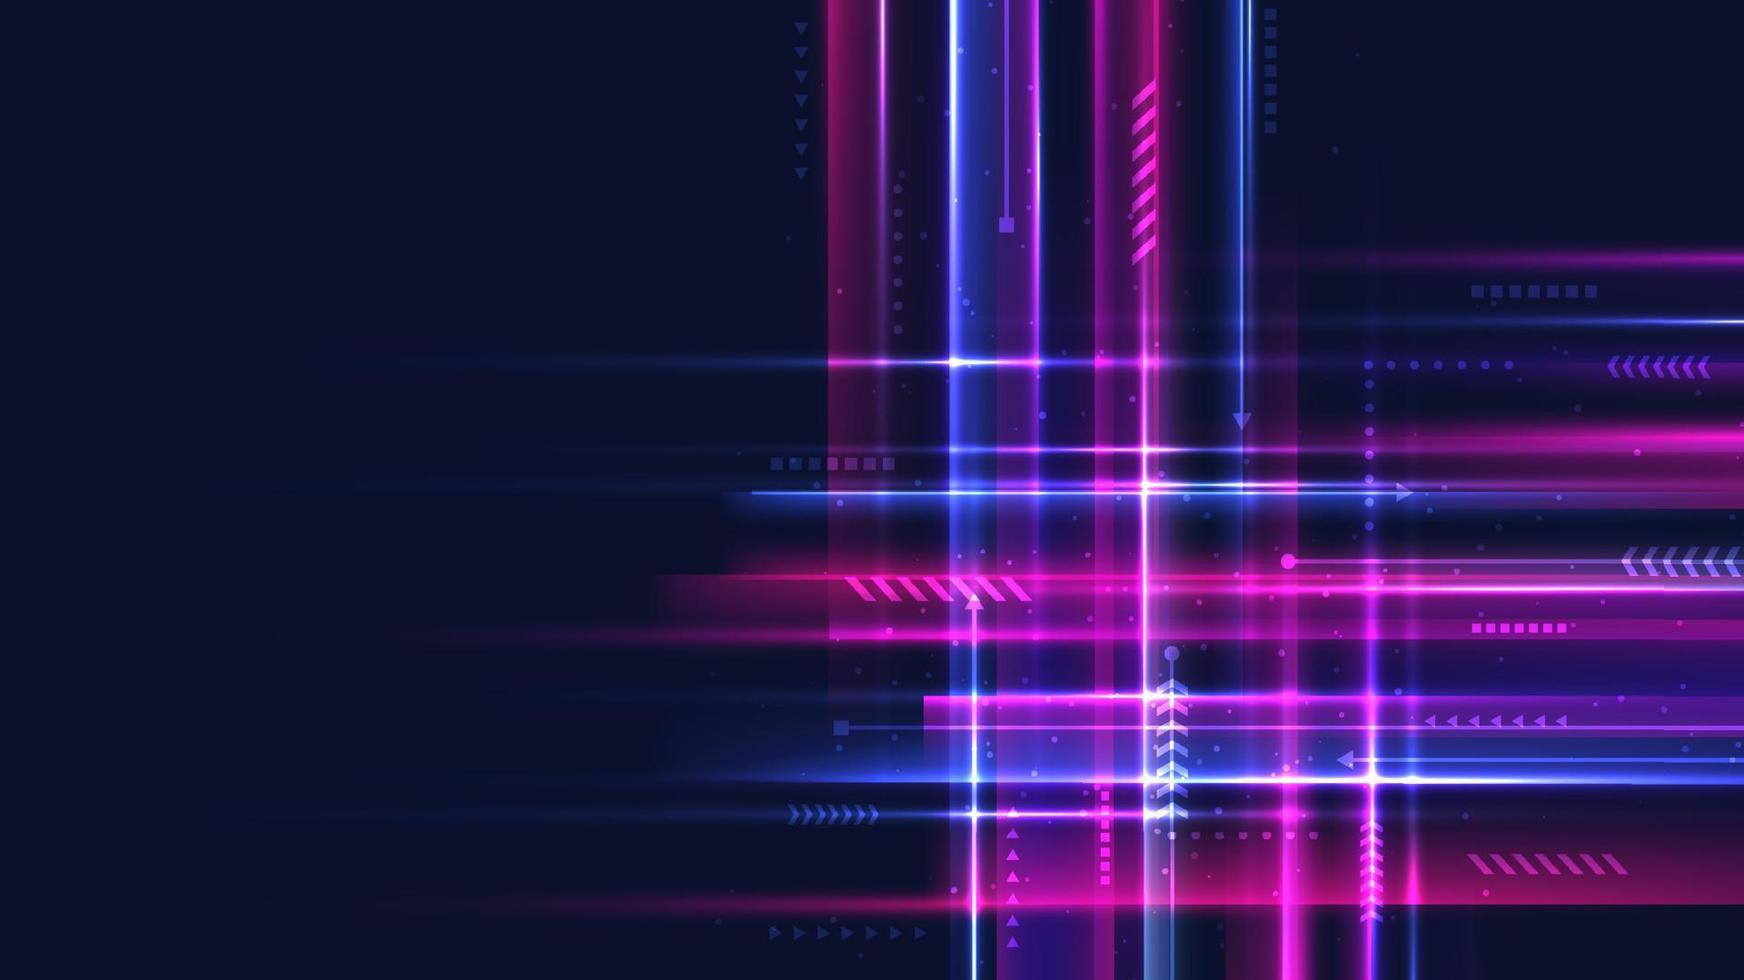 Abstract technology digital futuristic concept  blue and pink neon colors lighting effect motion decoration geometric shapes elements on dark background vector